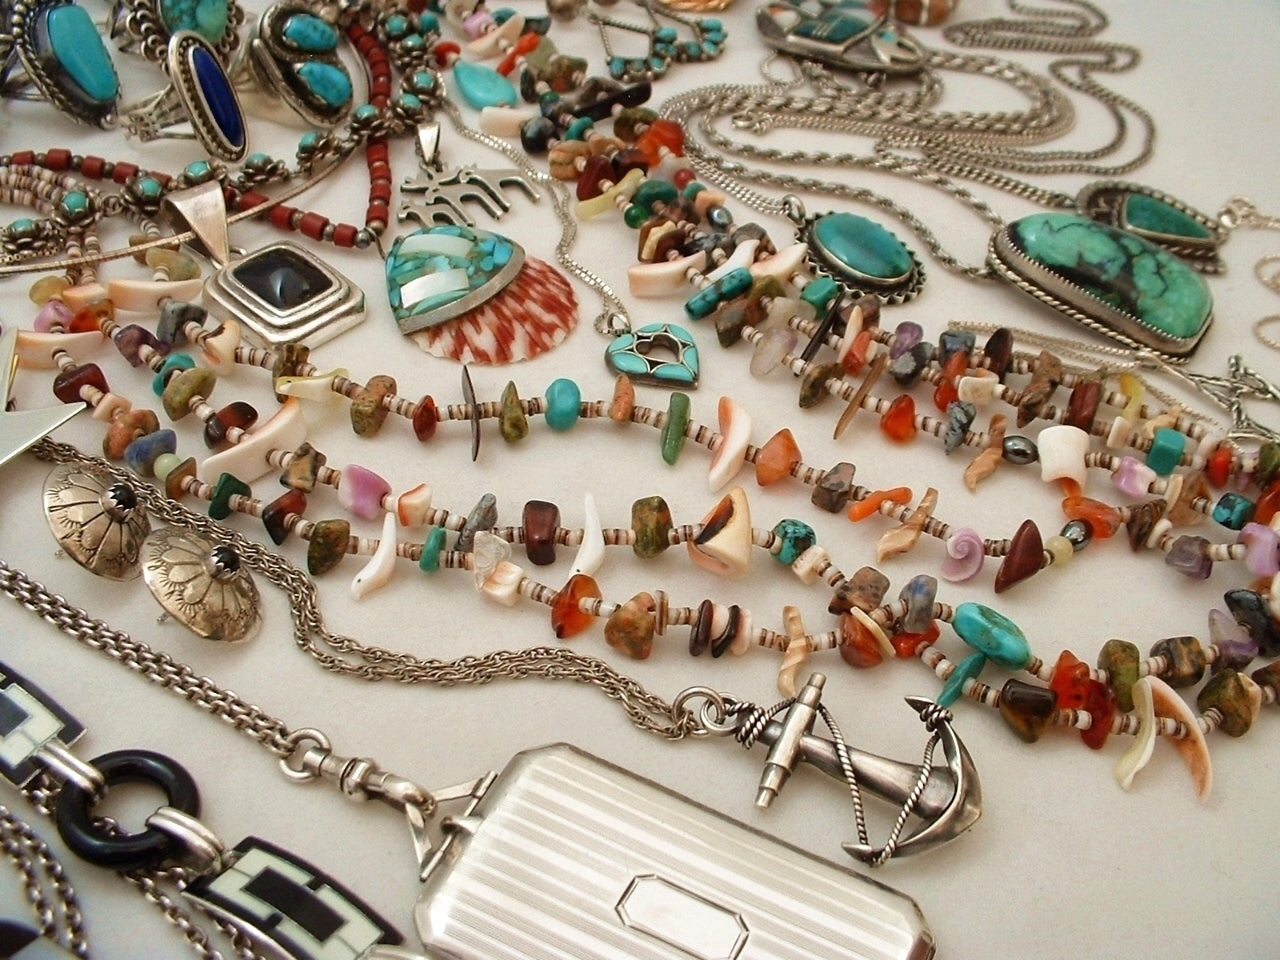 Antique Victorian to Vintage Native American Jewelry - Years After